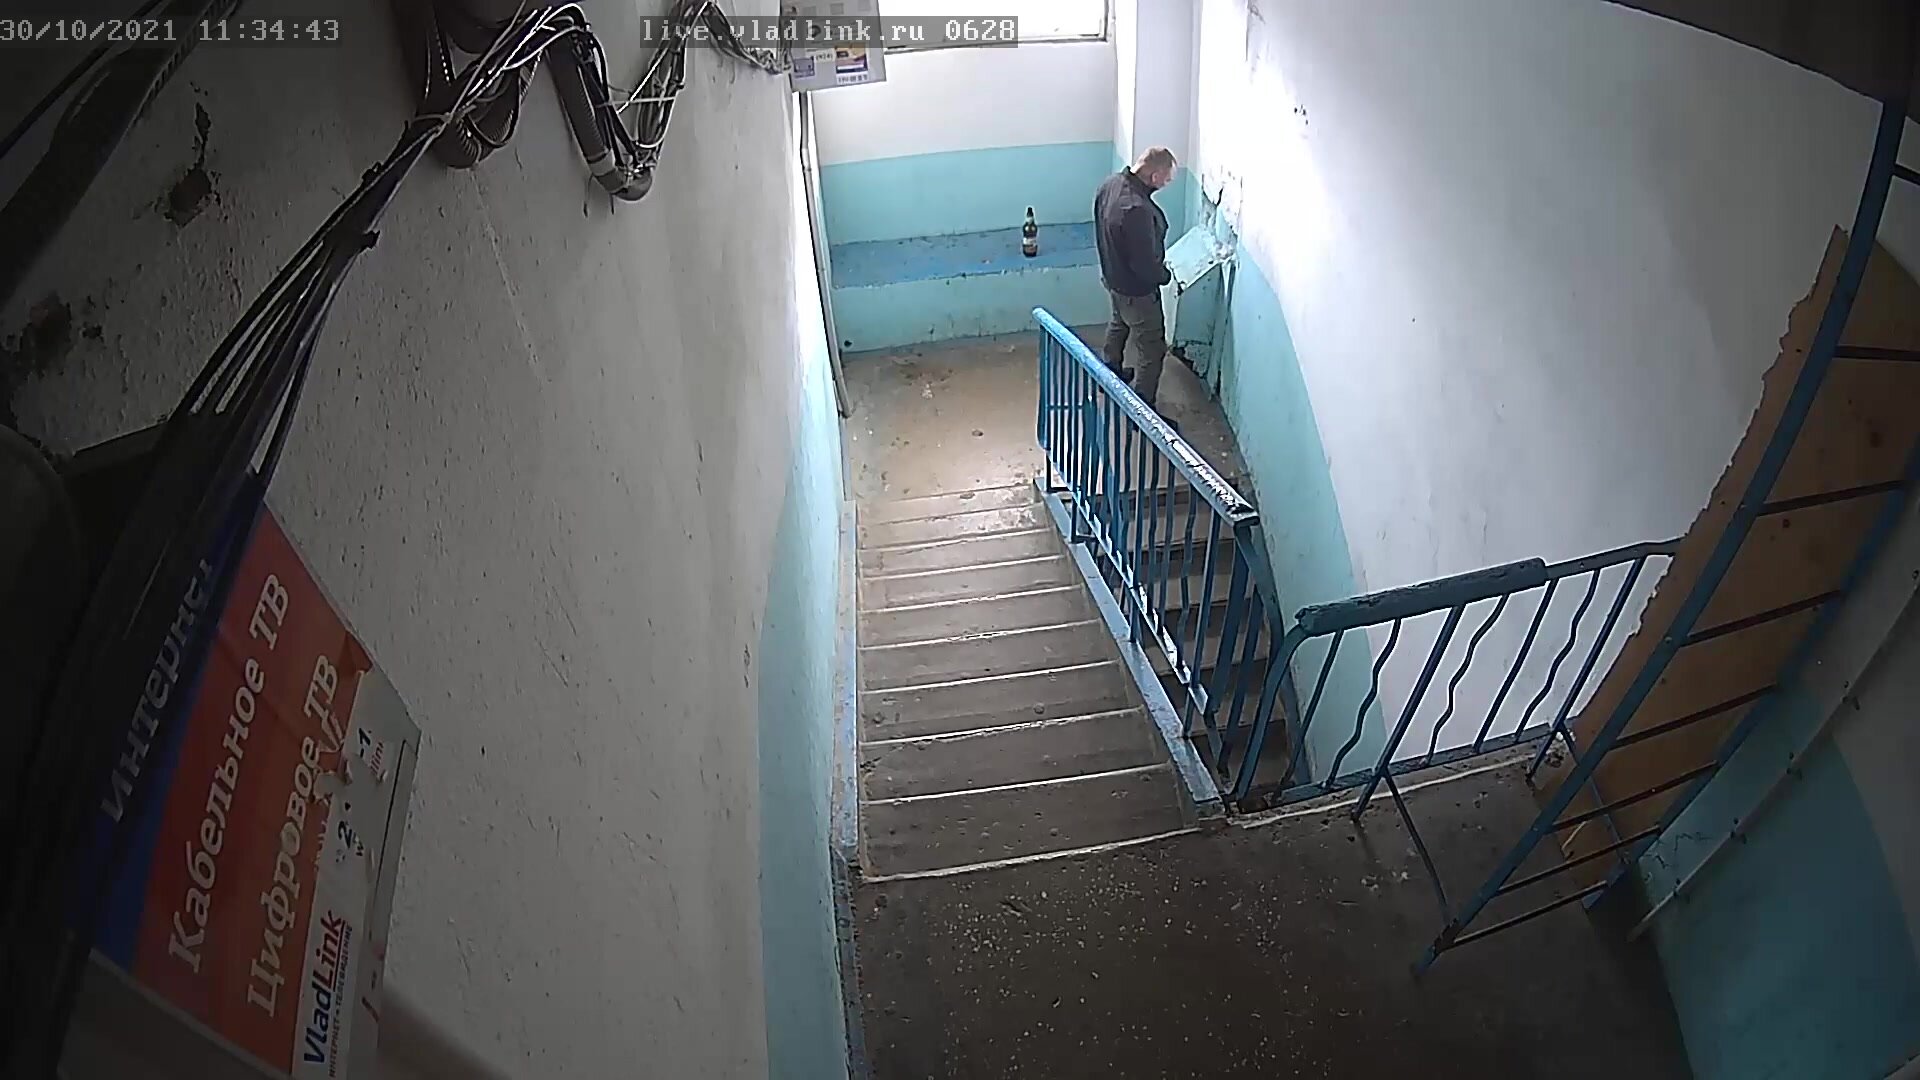 Guy pissing on the stairwell